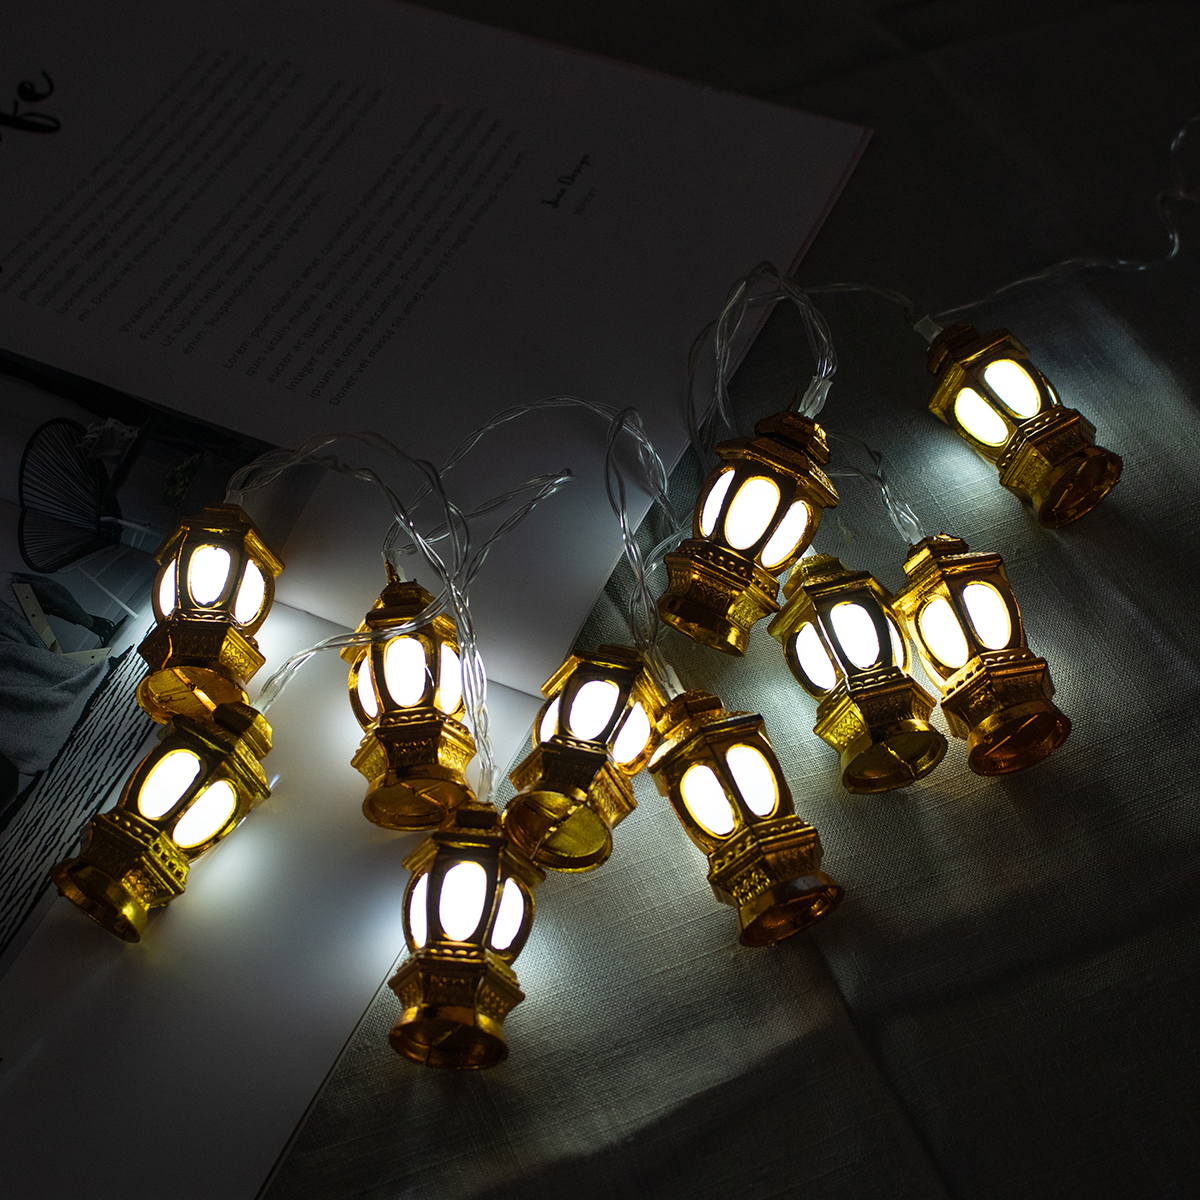 165M-Gold-Oil-Lamp-Battery-Powered-10LED-Fairy-String-Light-for-Holiday-Christmas-Indoor-Home-Decora-1547524-6